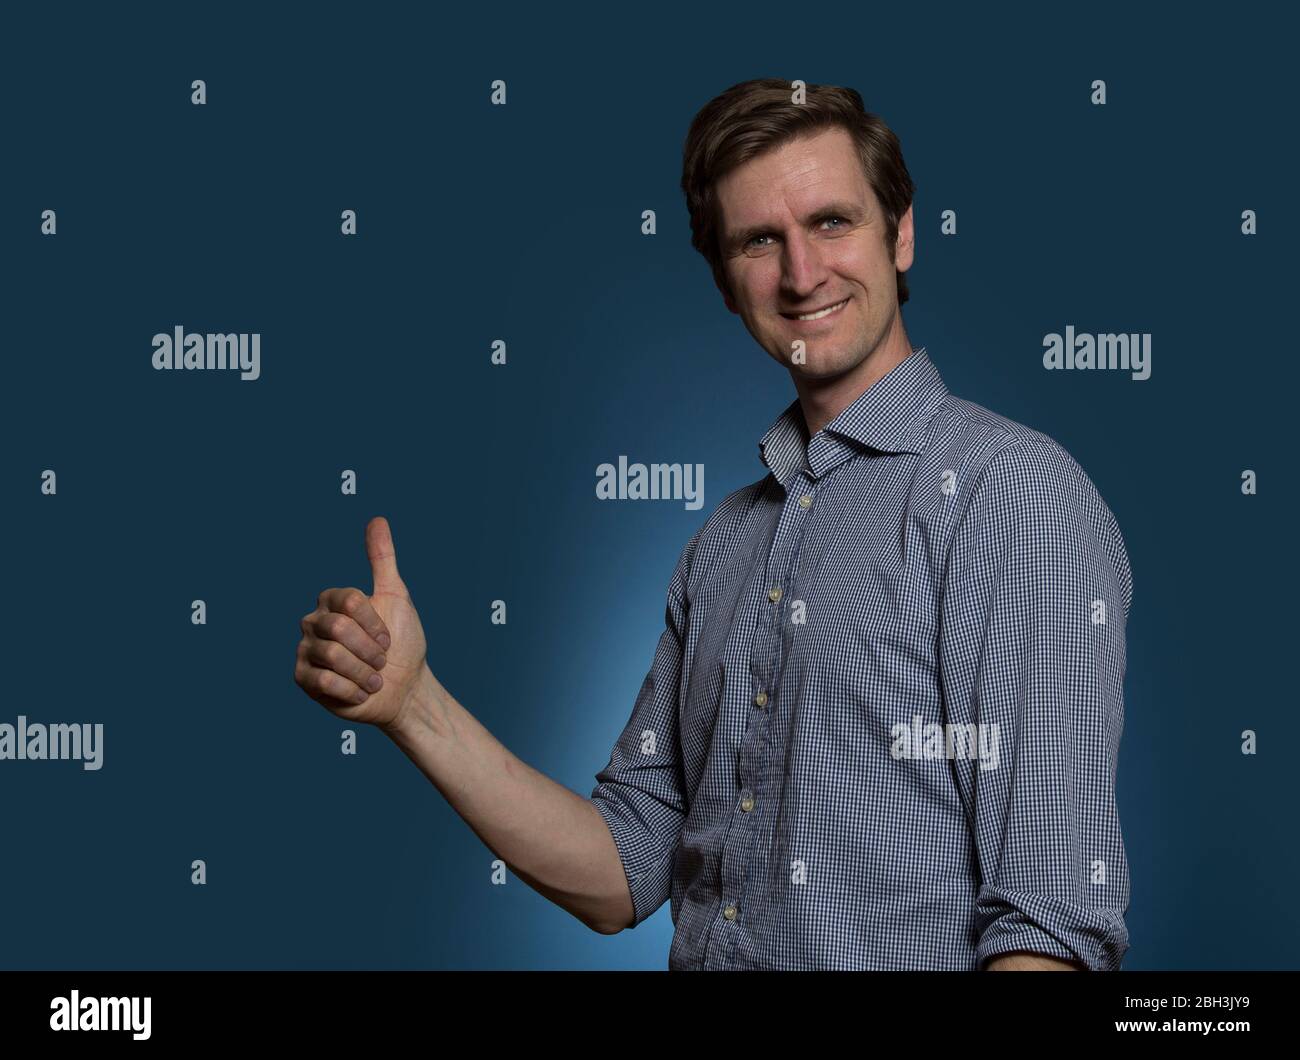 Man Giving the Thumbs Up and Smiling Stock Photo